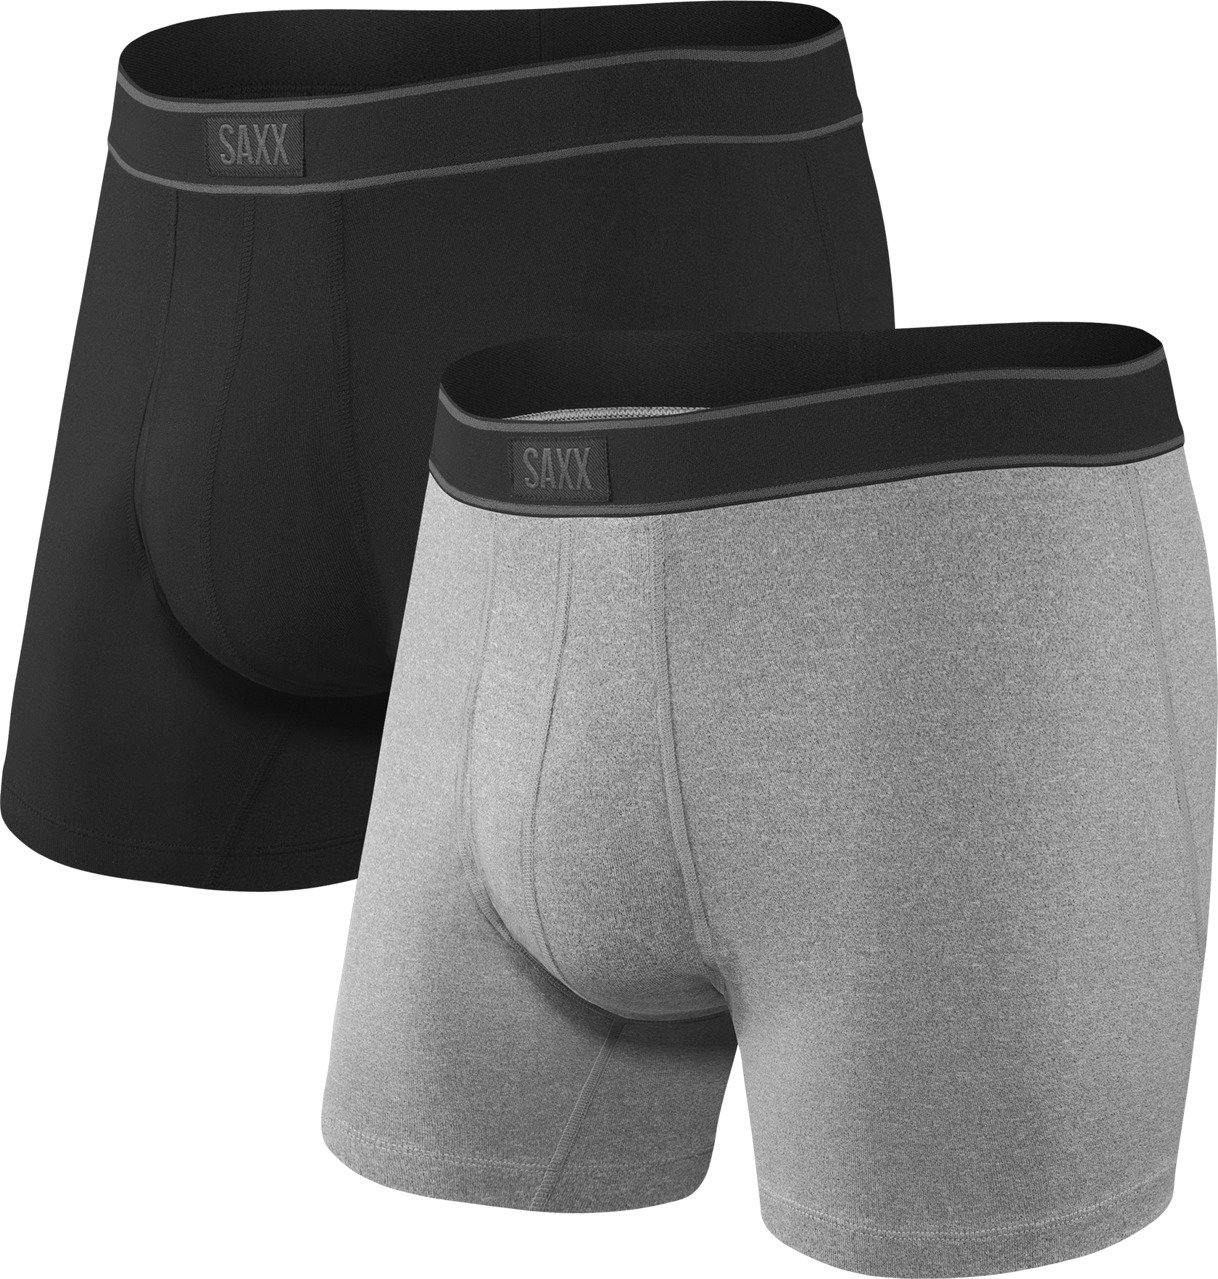 Product image for Daytripper Boxer Brief Fly 2 Pack - Men's